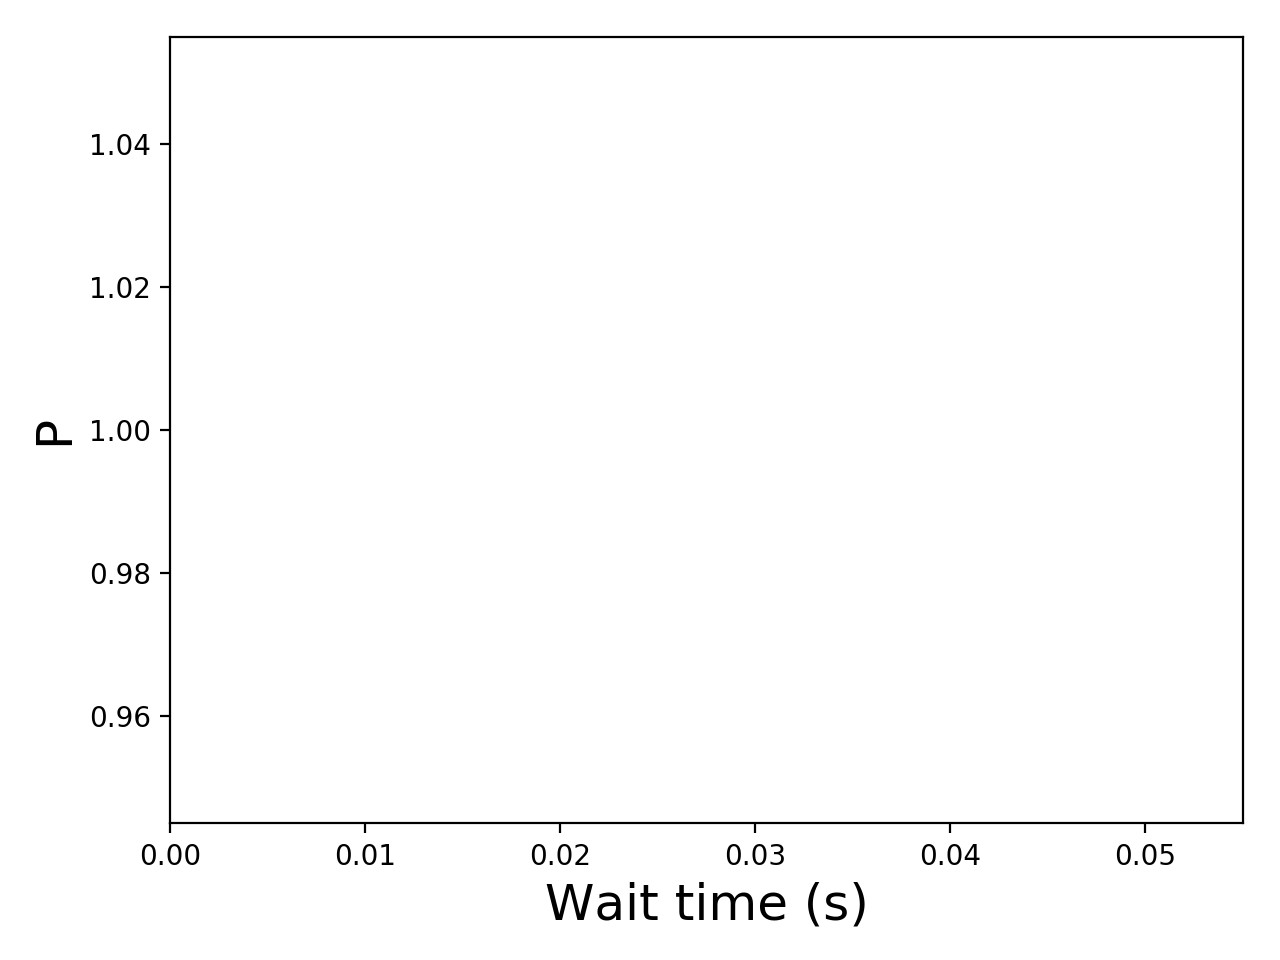 Task wait time CDF graph for the alibaba2018 trace.